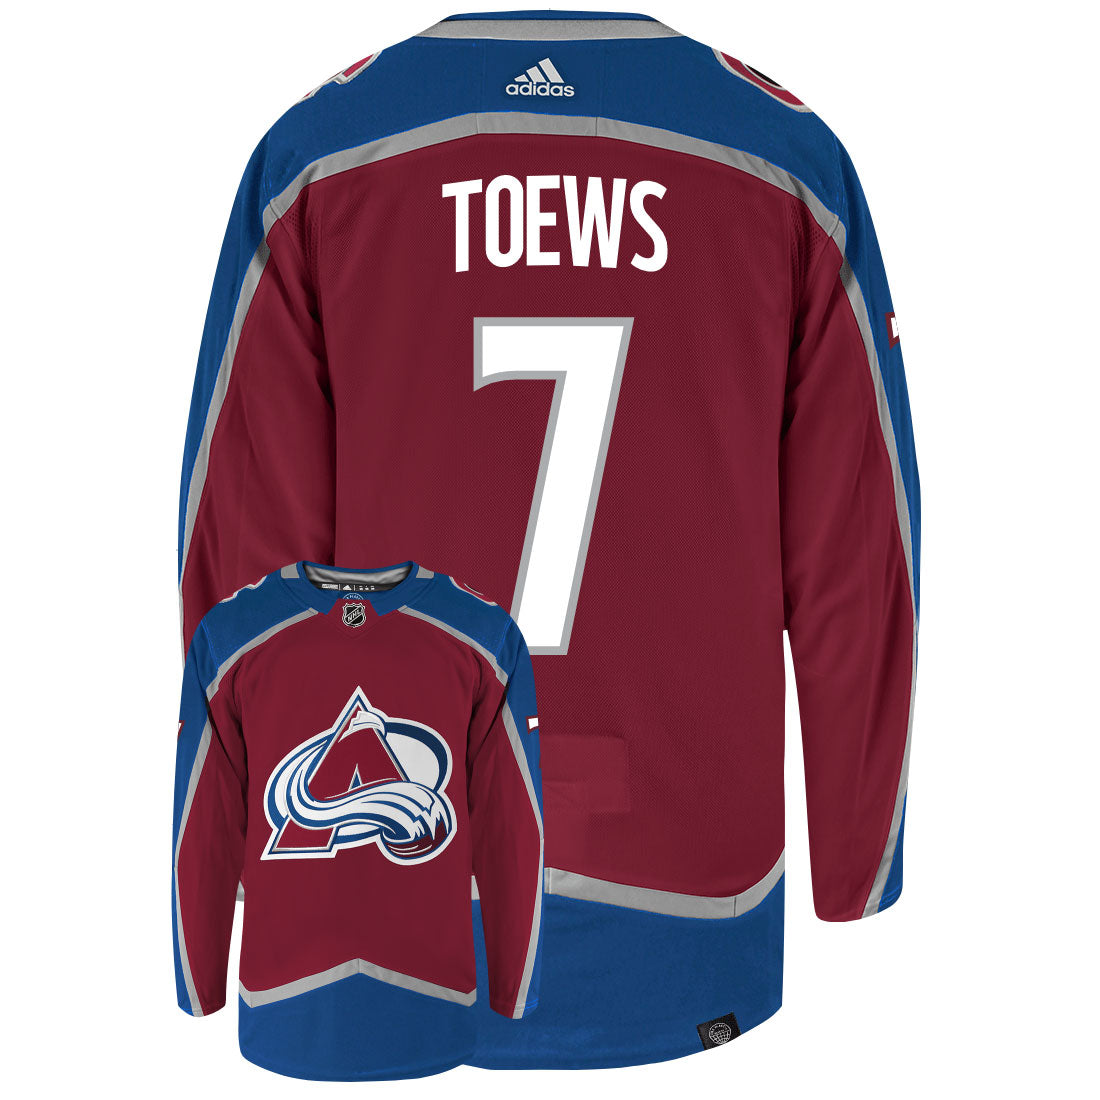 Devon Toews Colorado Avalanche Adidas Primegreen Authentic Home NHL Hockey Jersey - Back/Front View